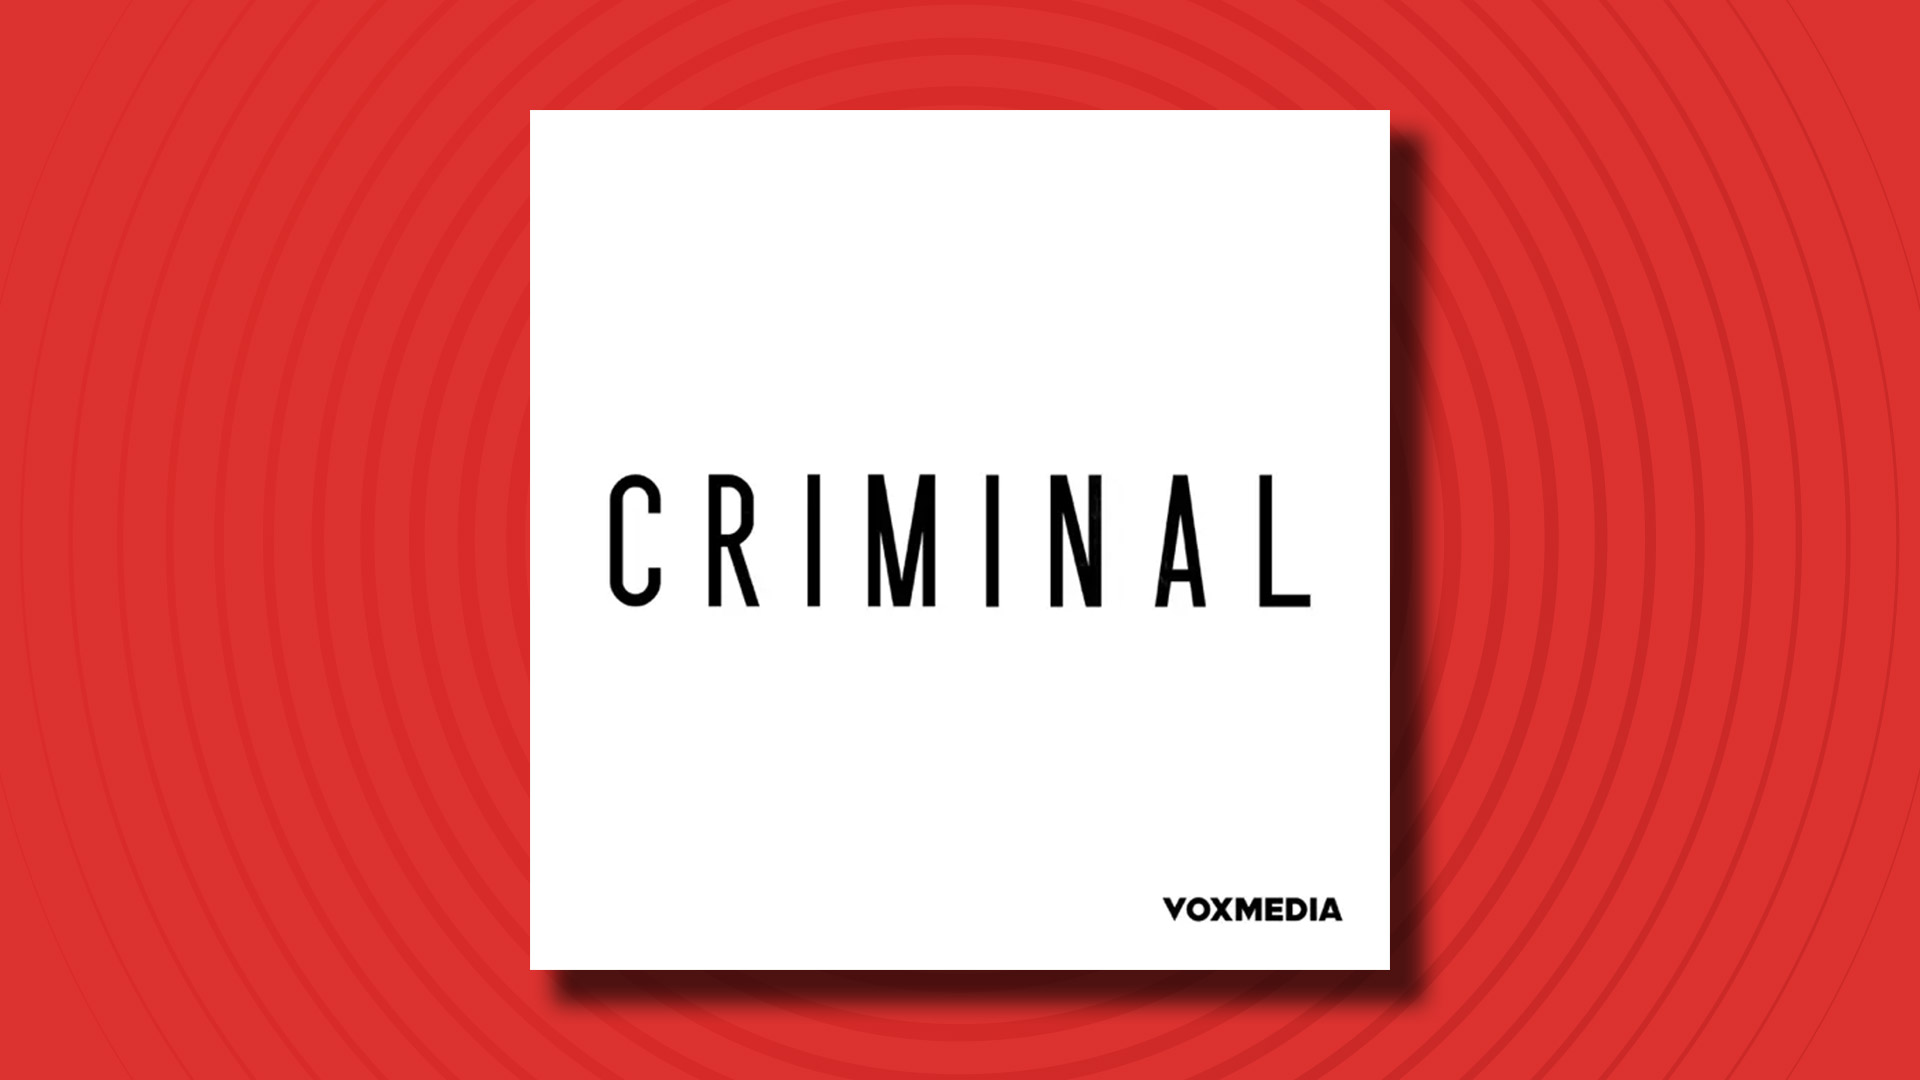 The logo of the Criminal podcast on a red background